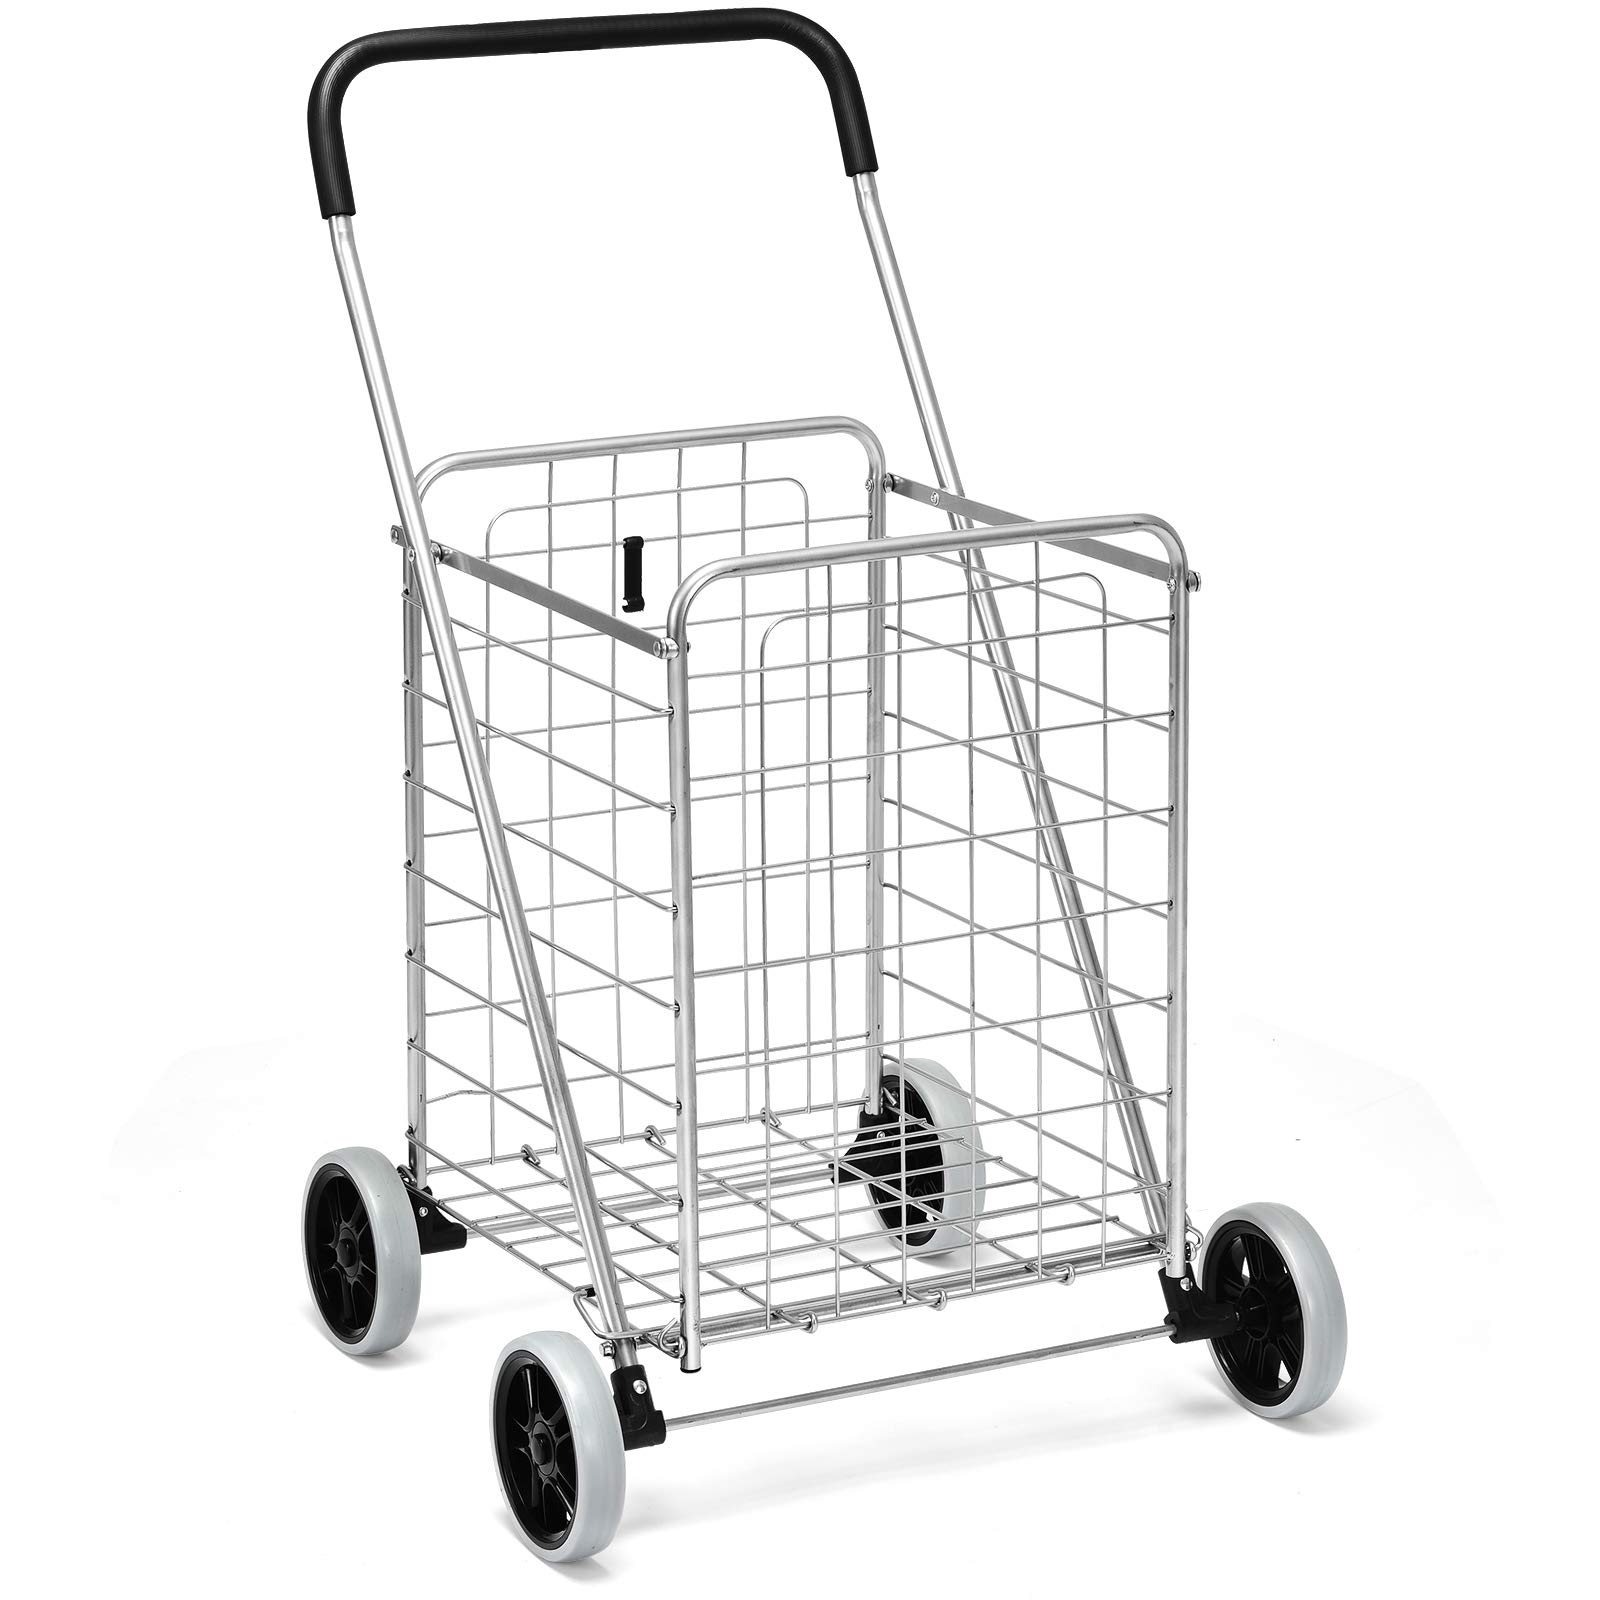 Goplus Folding Shopping Cart, Light Weight Utility Grocery Cart with Wheels, Portable Cart